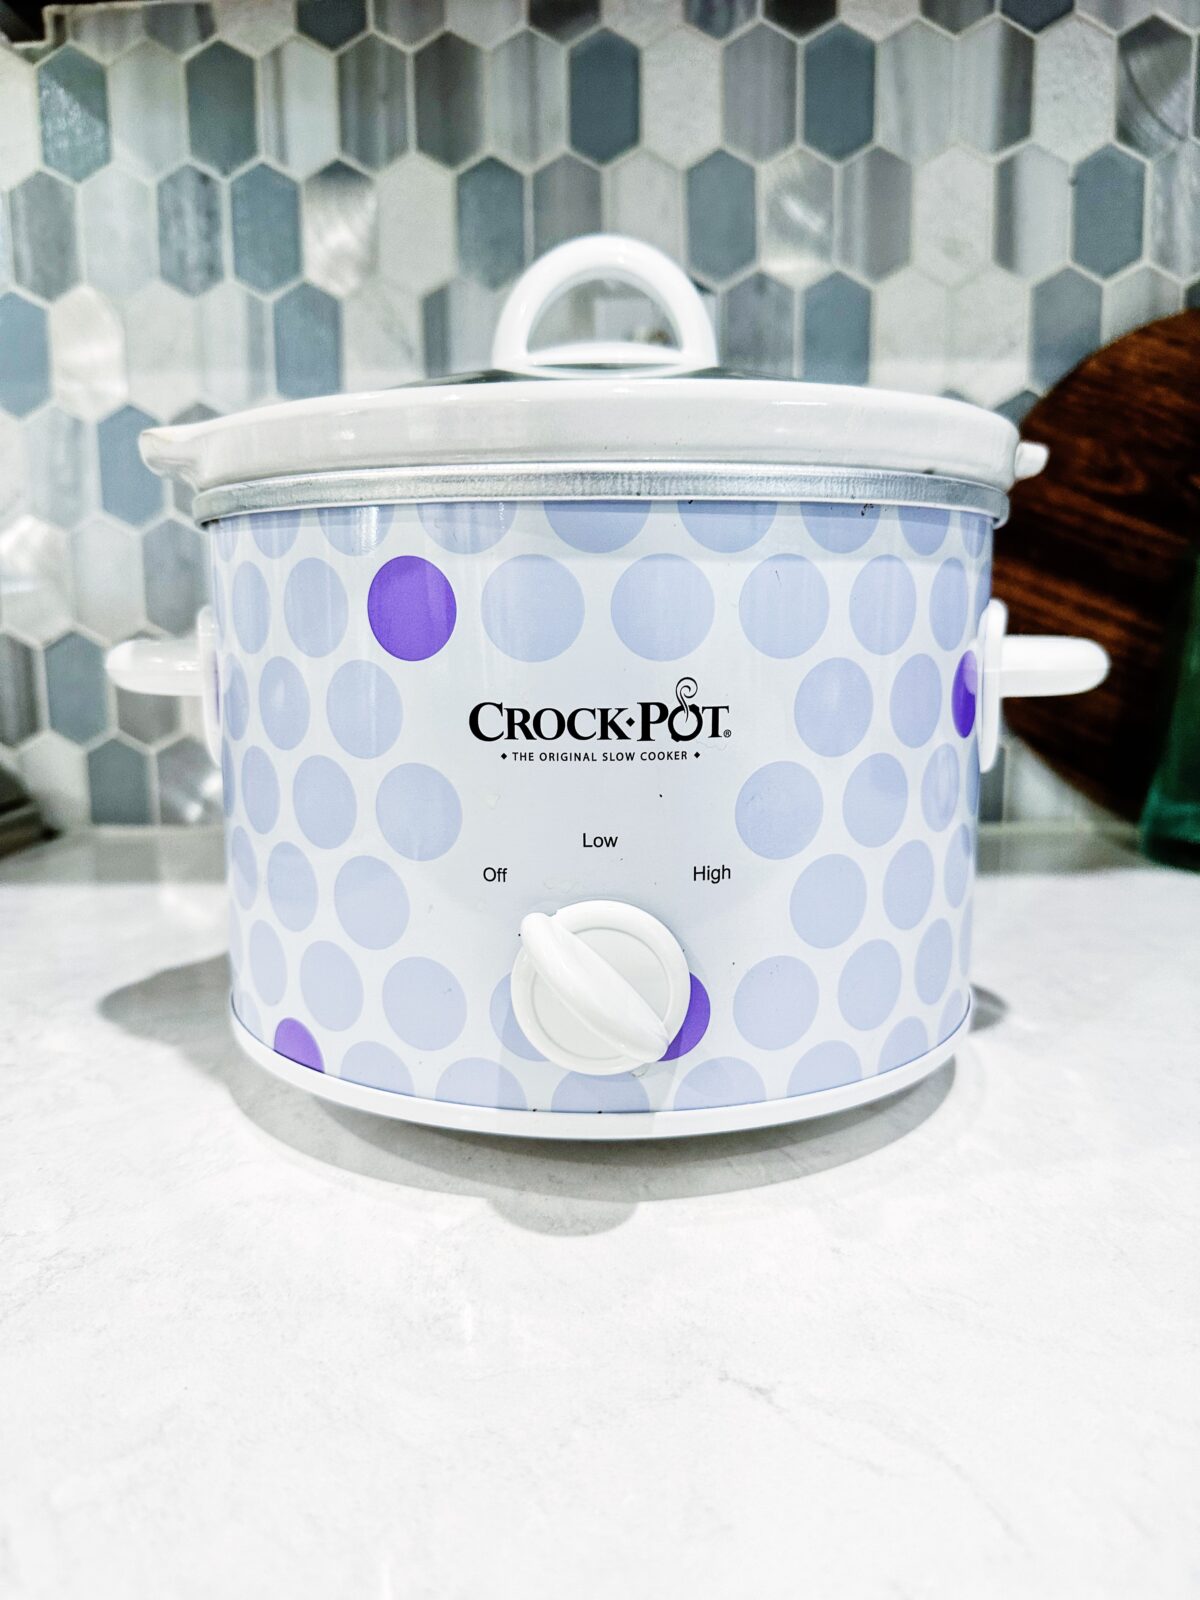 2.5 quart round slow cooker with purple dots